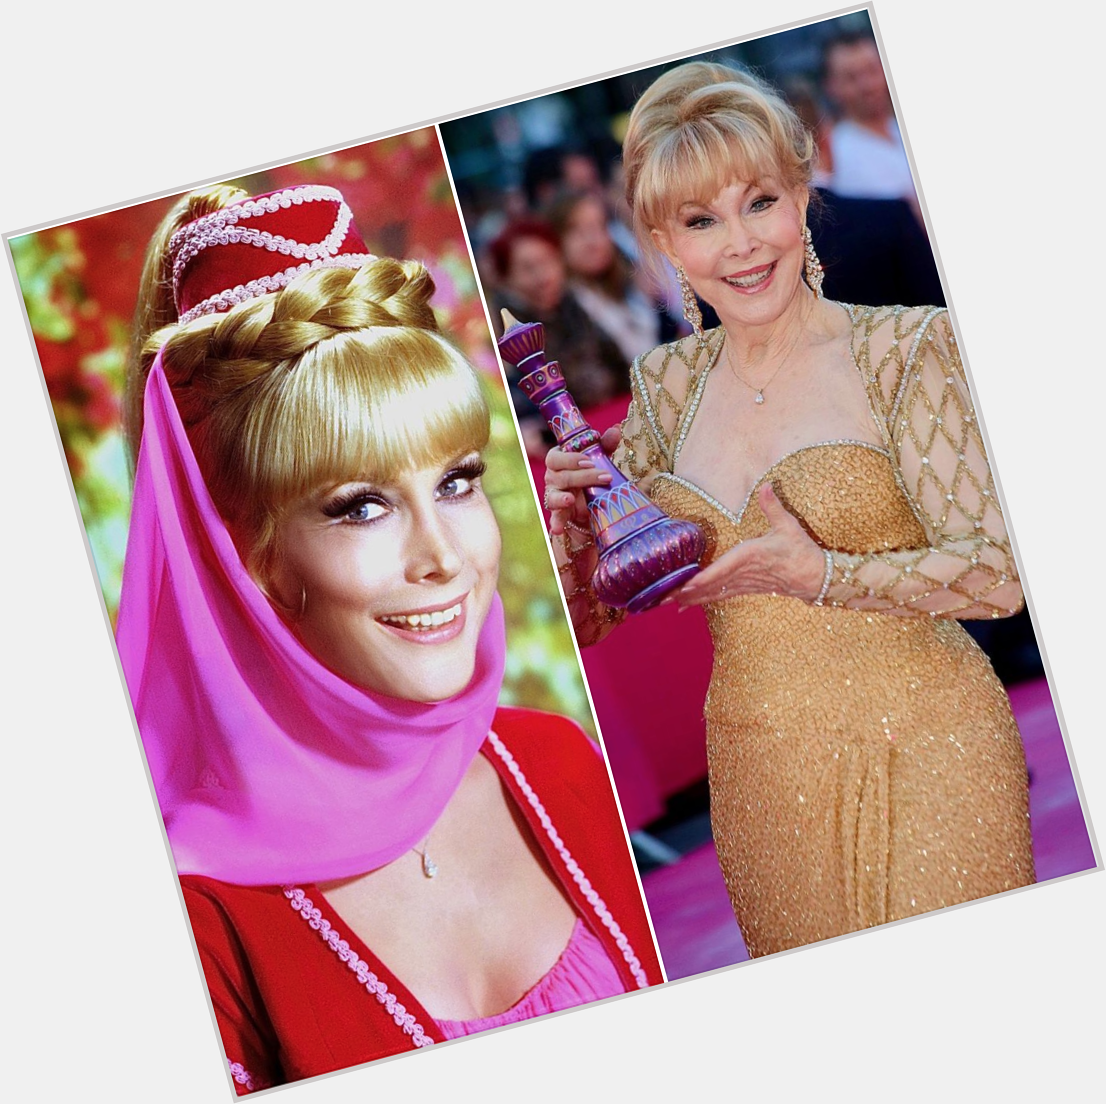 Happy birthday, The star of I DREAM OF JEANNIE is 88 today and still acting!  